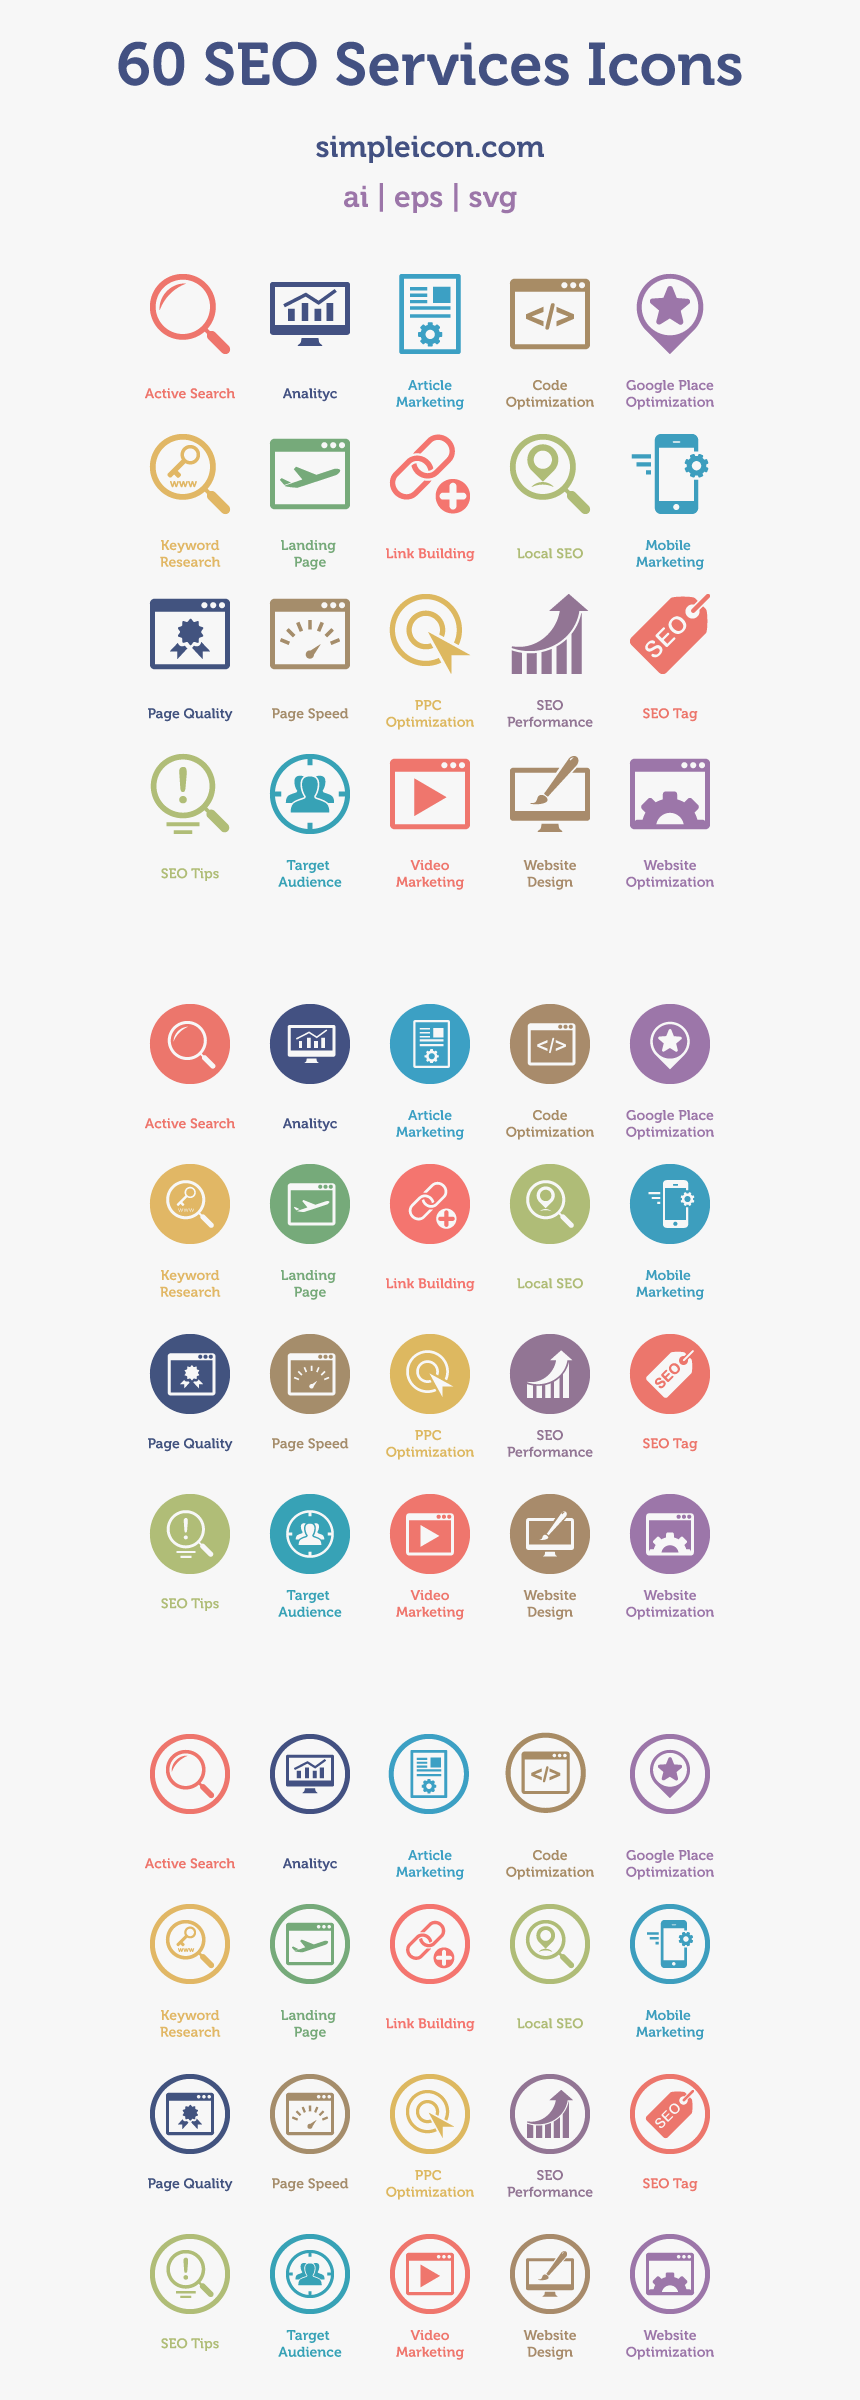 60 Seo Services Icons - Icons Used In Internet, HD Png Download, Free Download